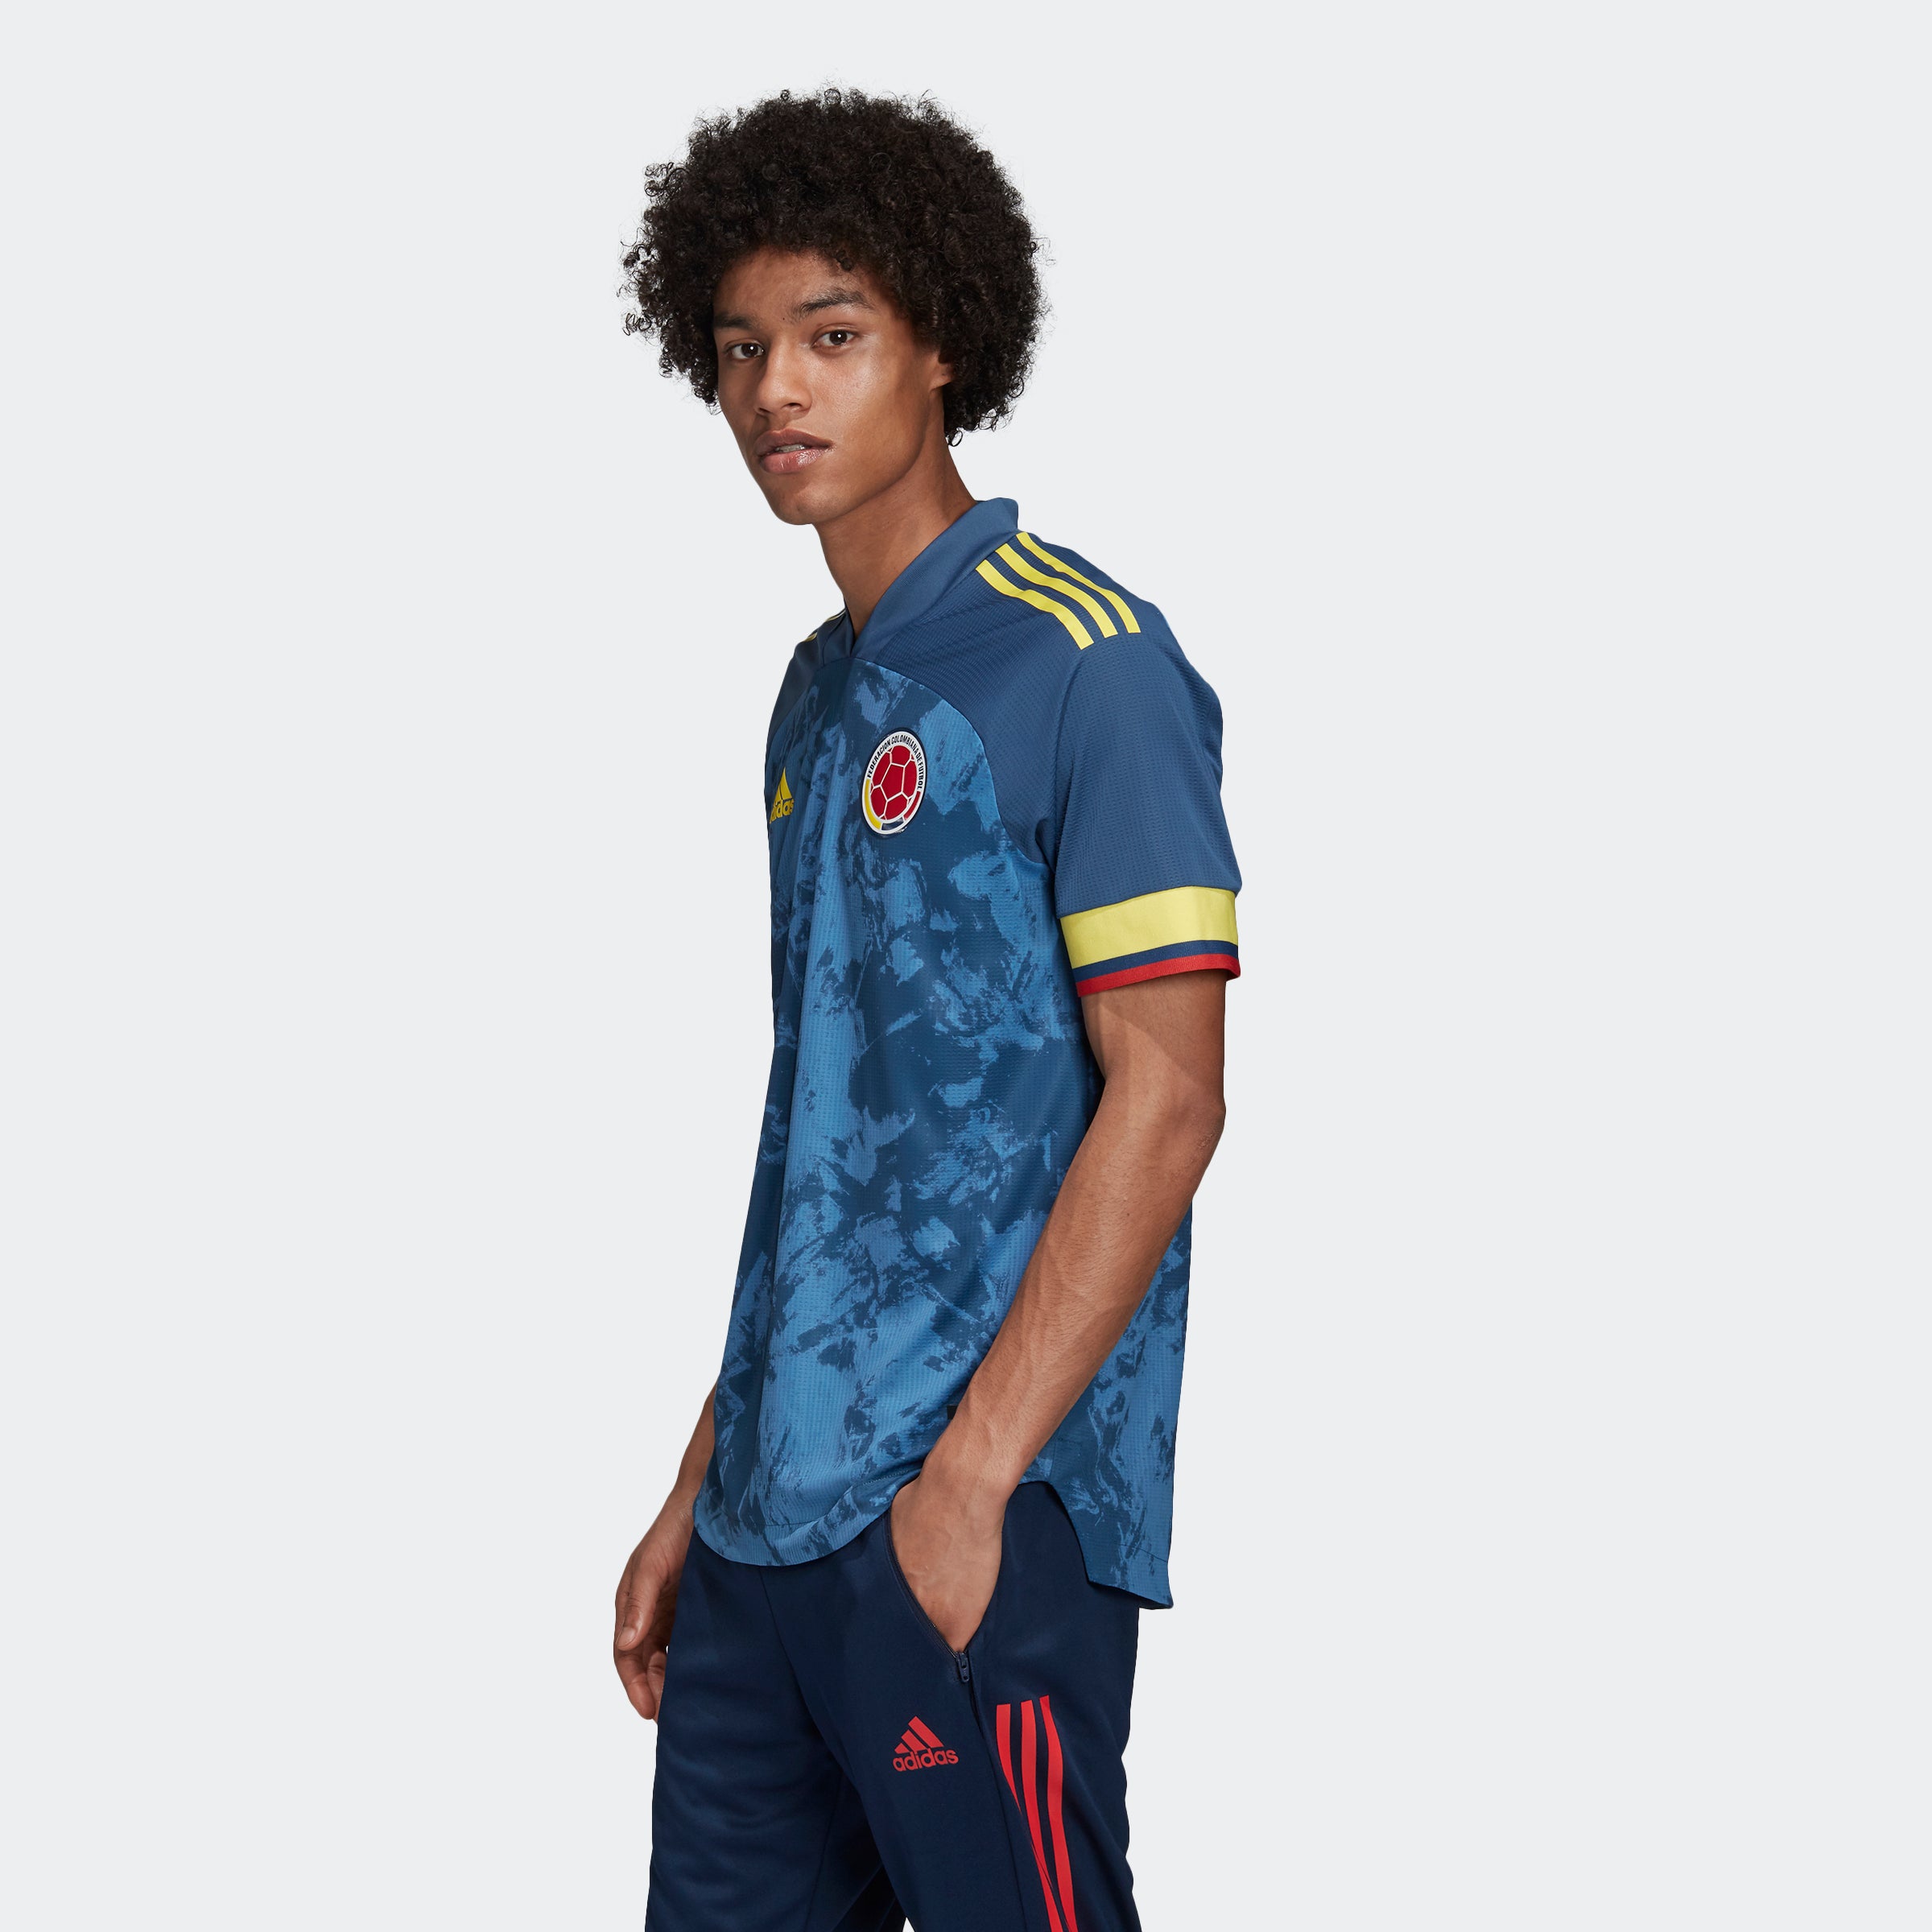 colombia soccer jersey yellow, Off 77%